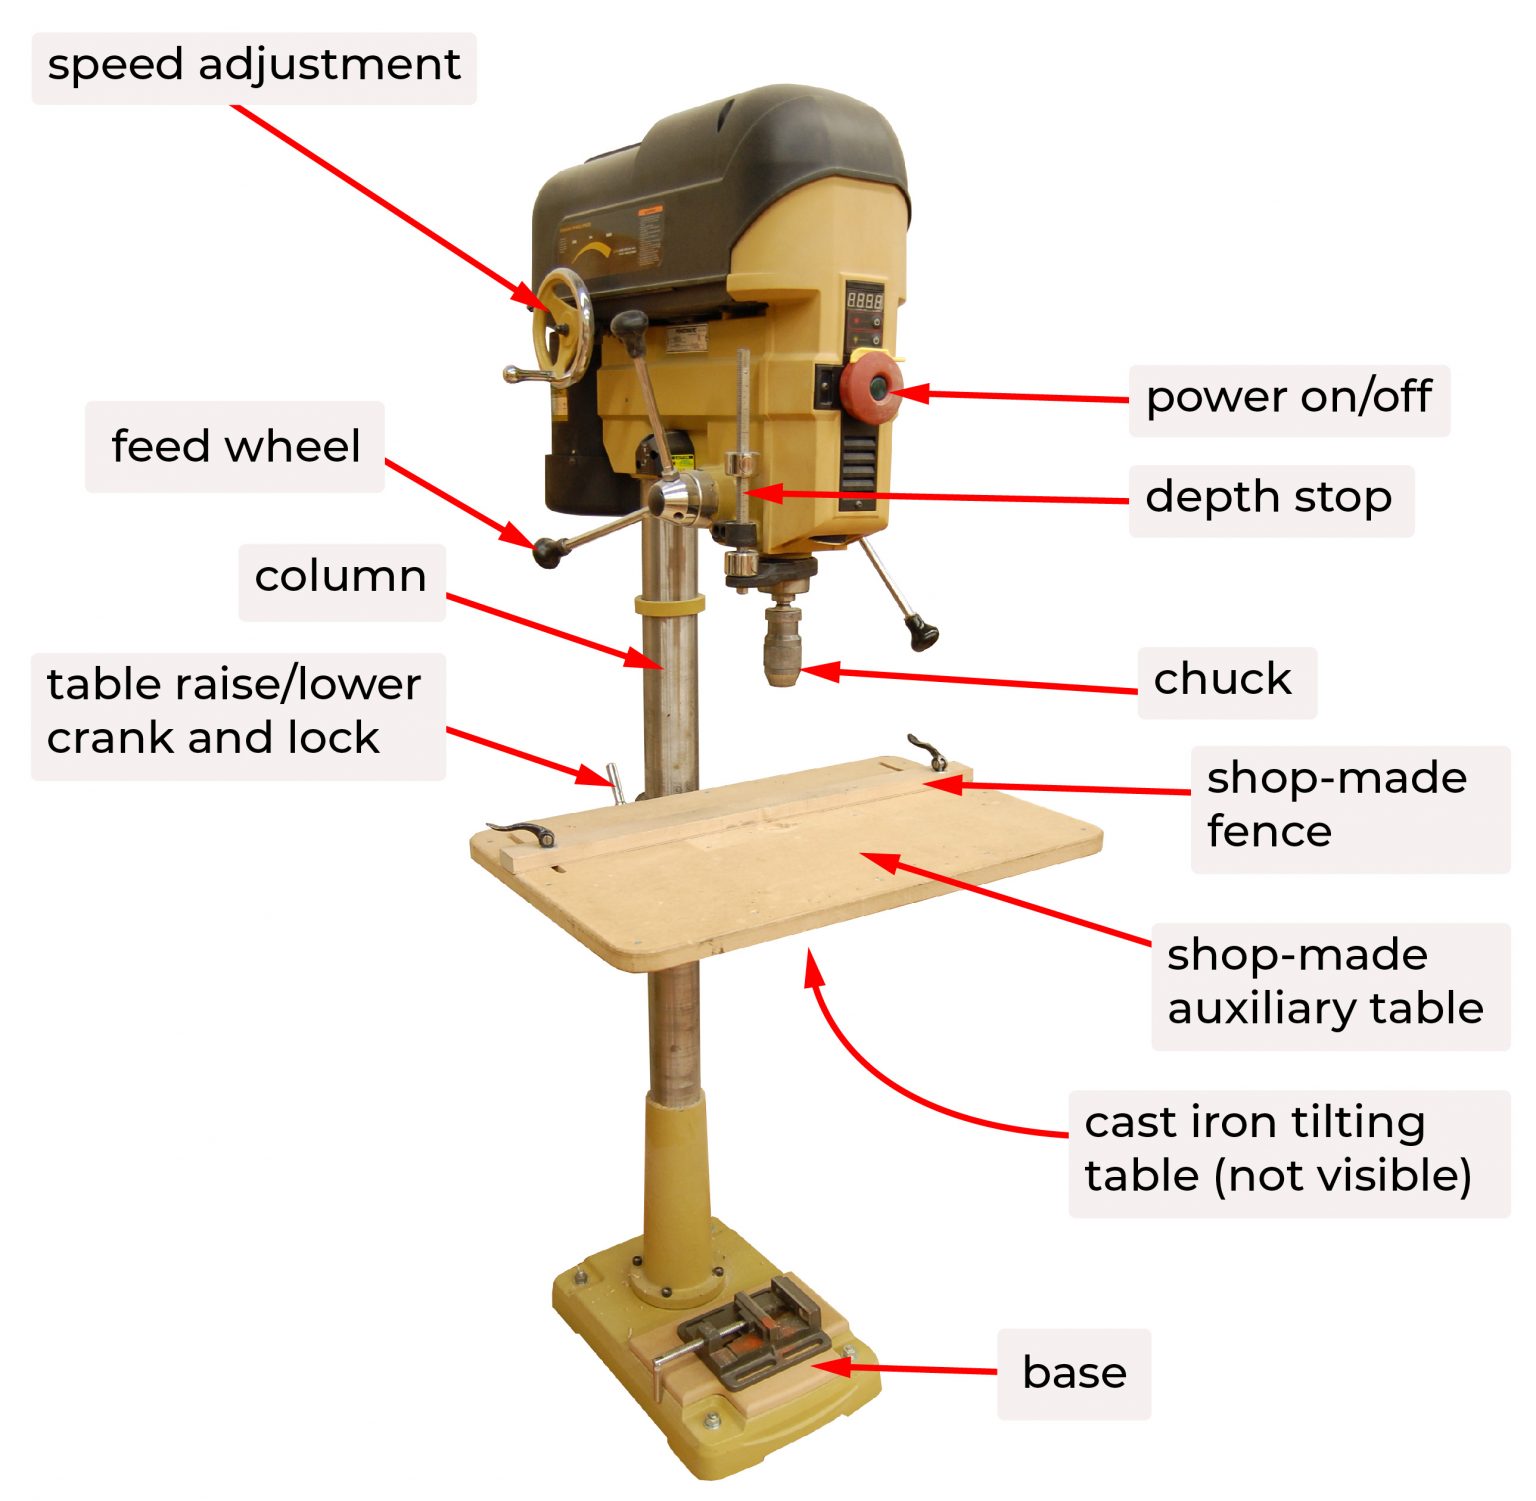 parts-of-the-drill-press-woodworking-machinery